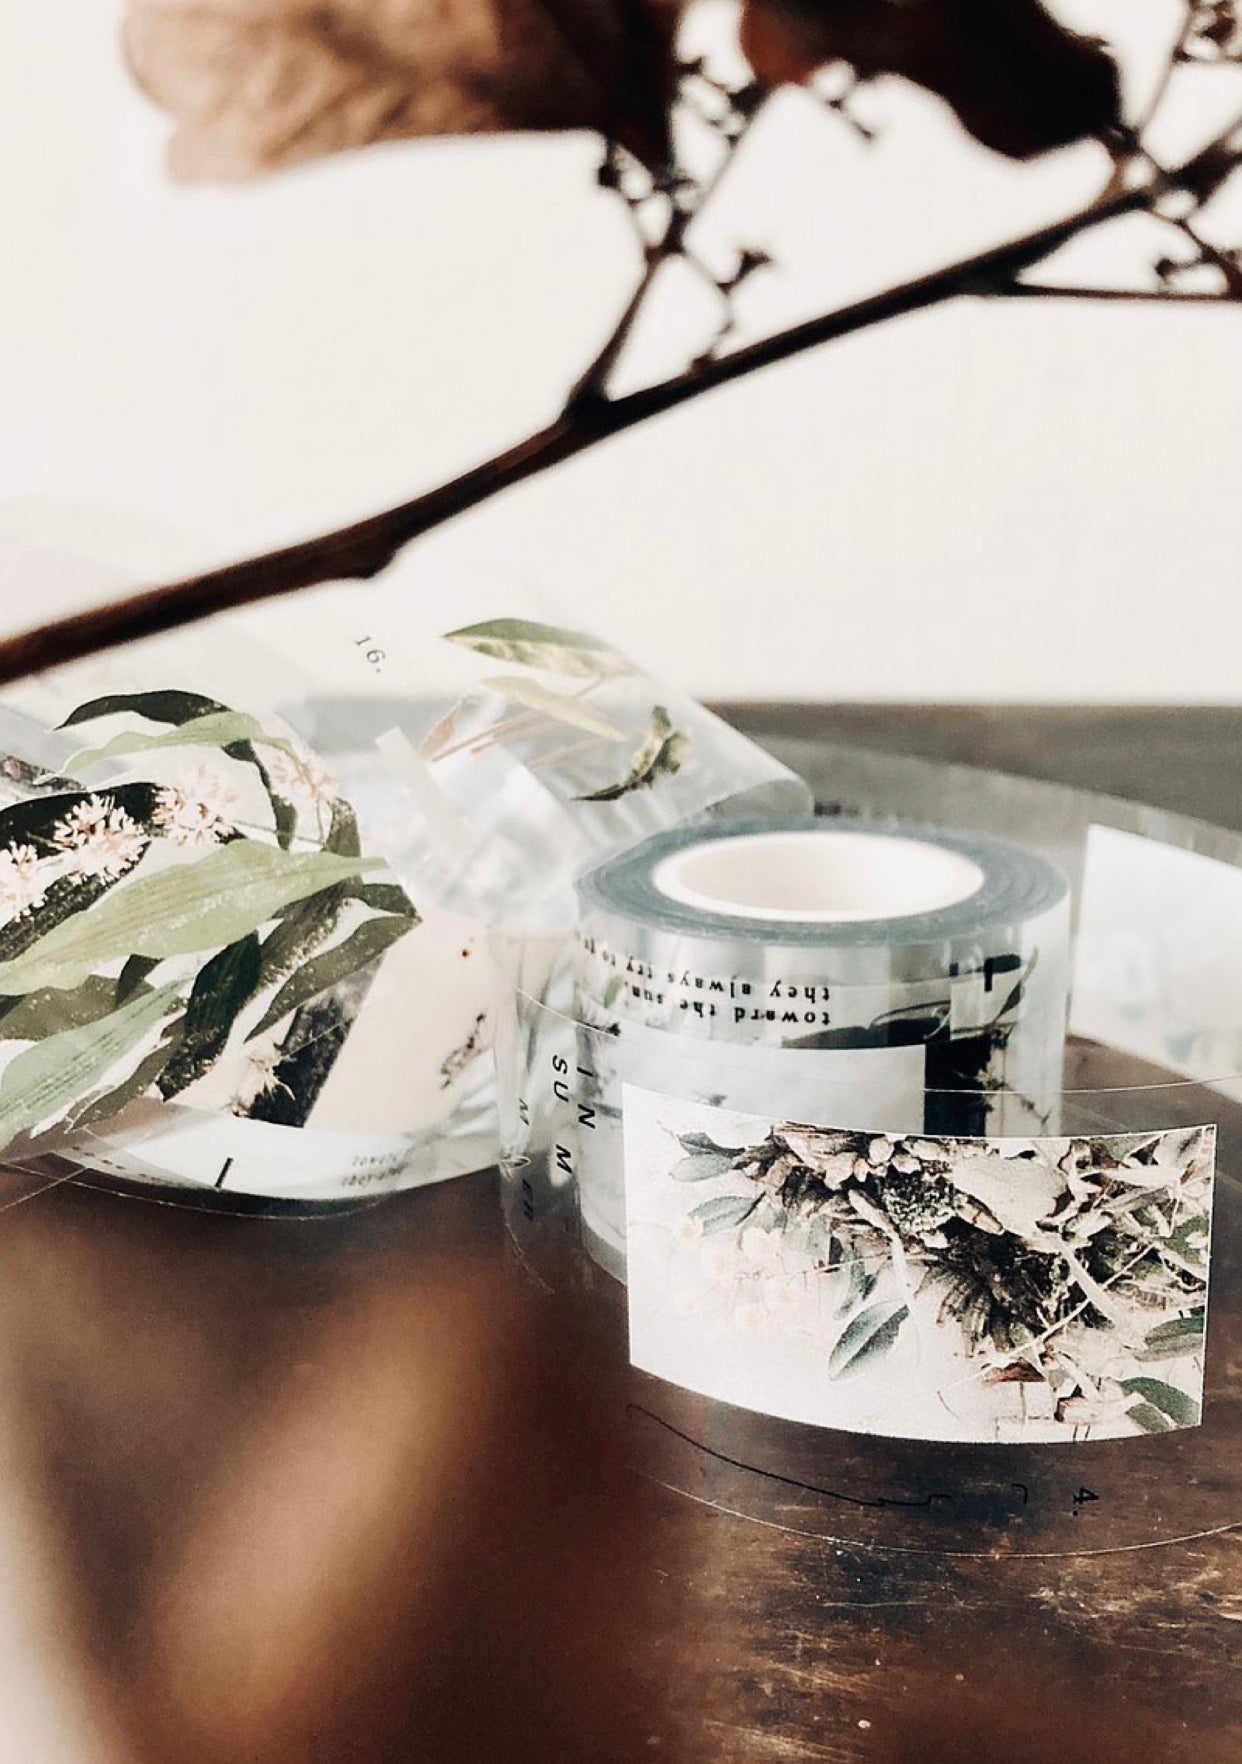 Somesortof.fern - Days With Leaves | 3.5cm PET Tape | Release Paper